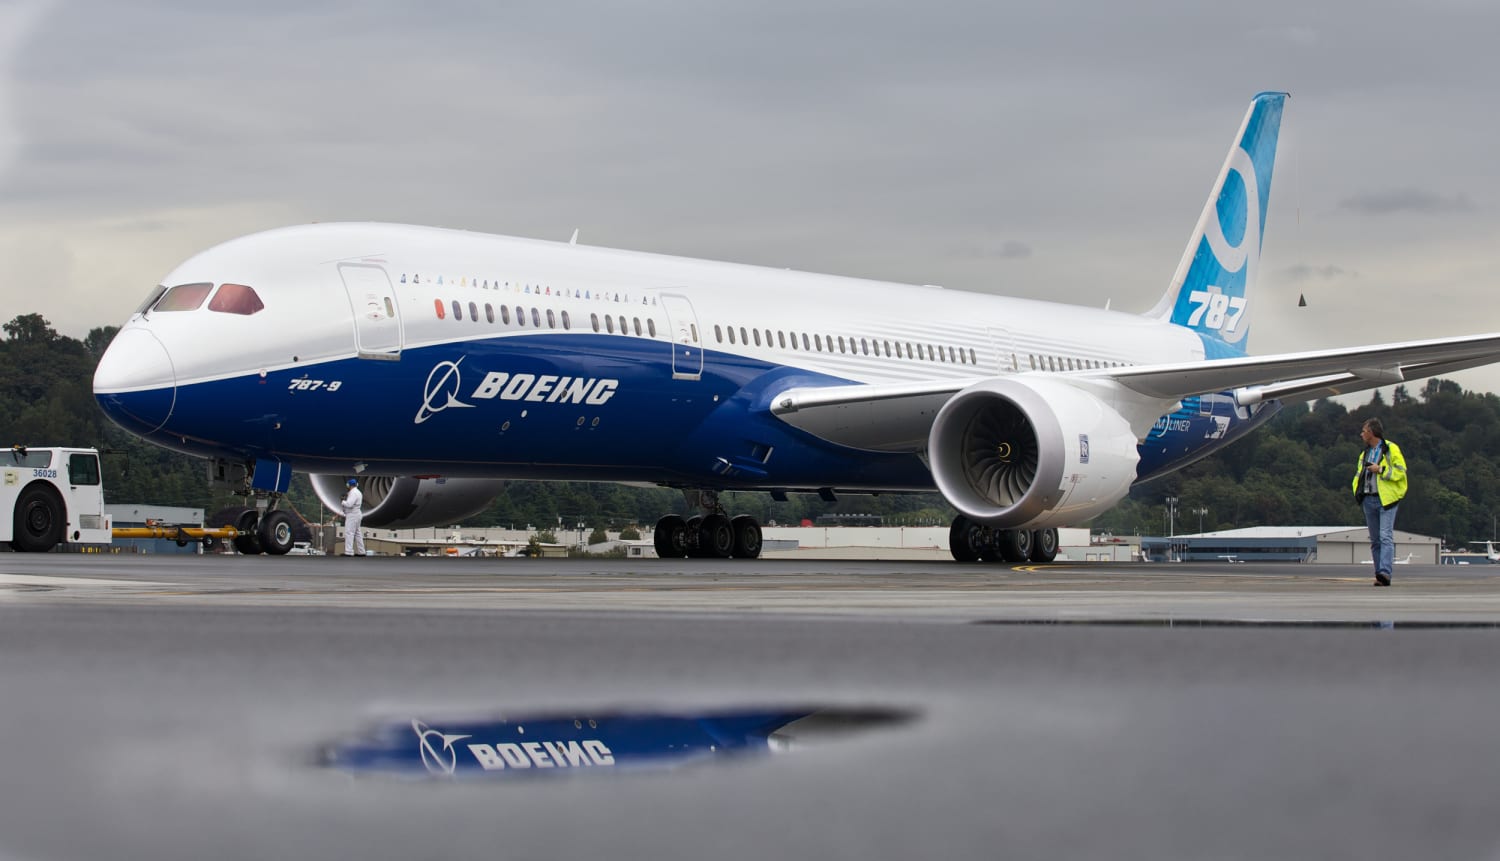 Boeing whistleblower says 787 Dreamliner may 'disintegrate' due to safety flaws